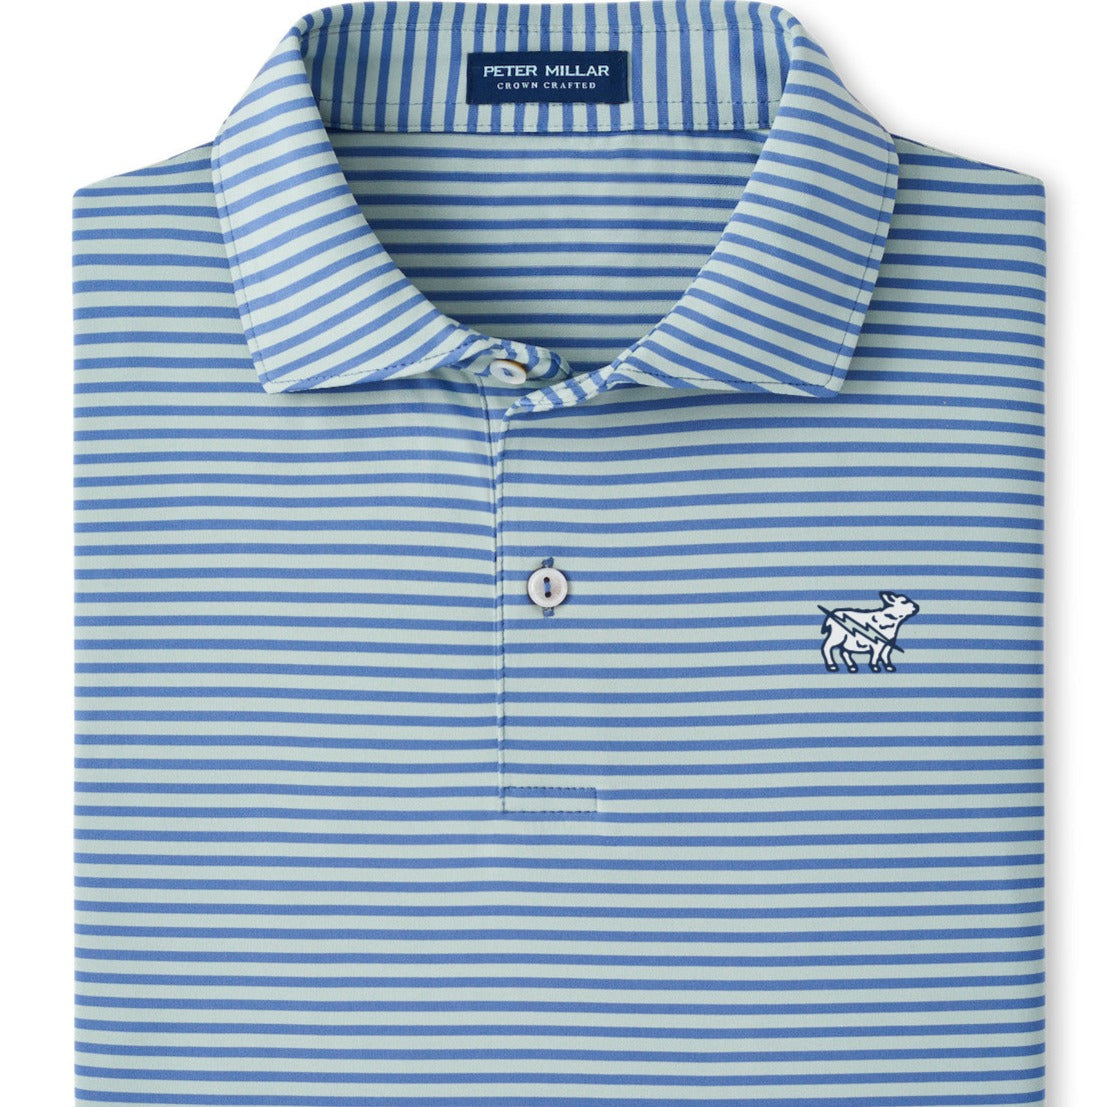 Top Selects from Peter Millar's Crown Crafted Collection